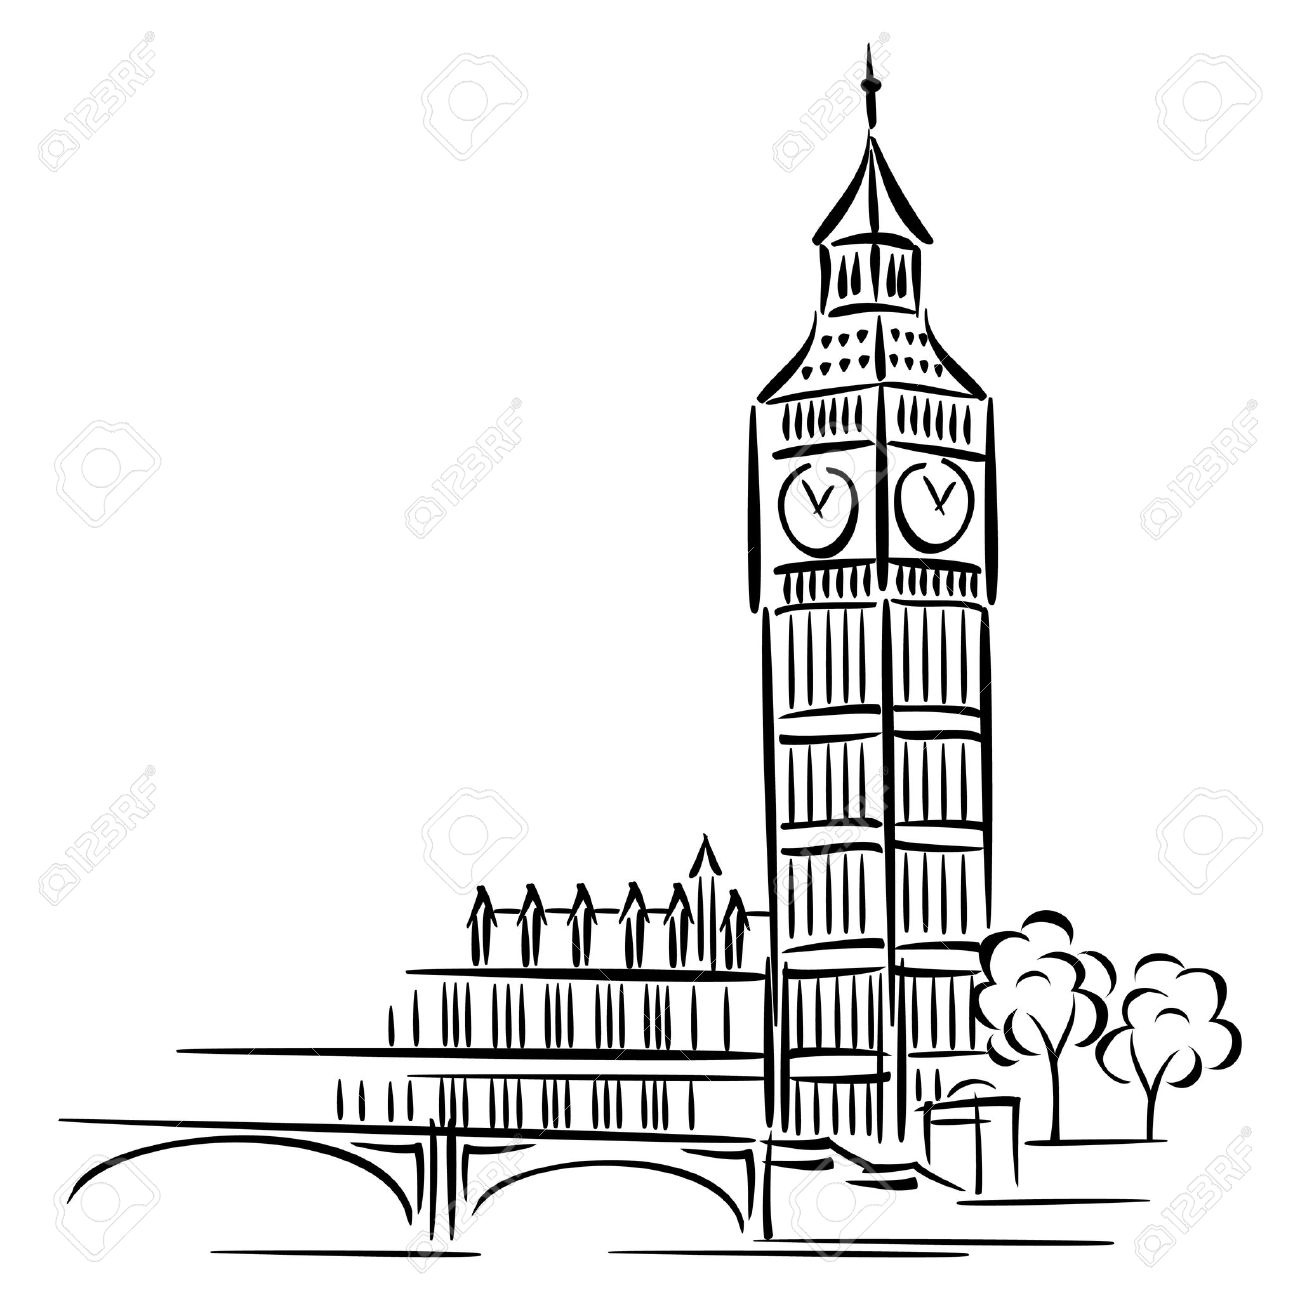 Big Ben clipart black and white